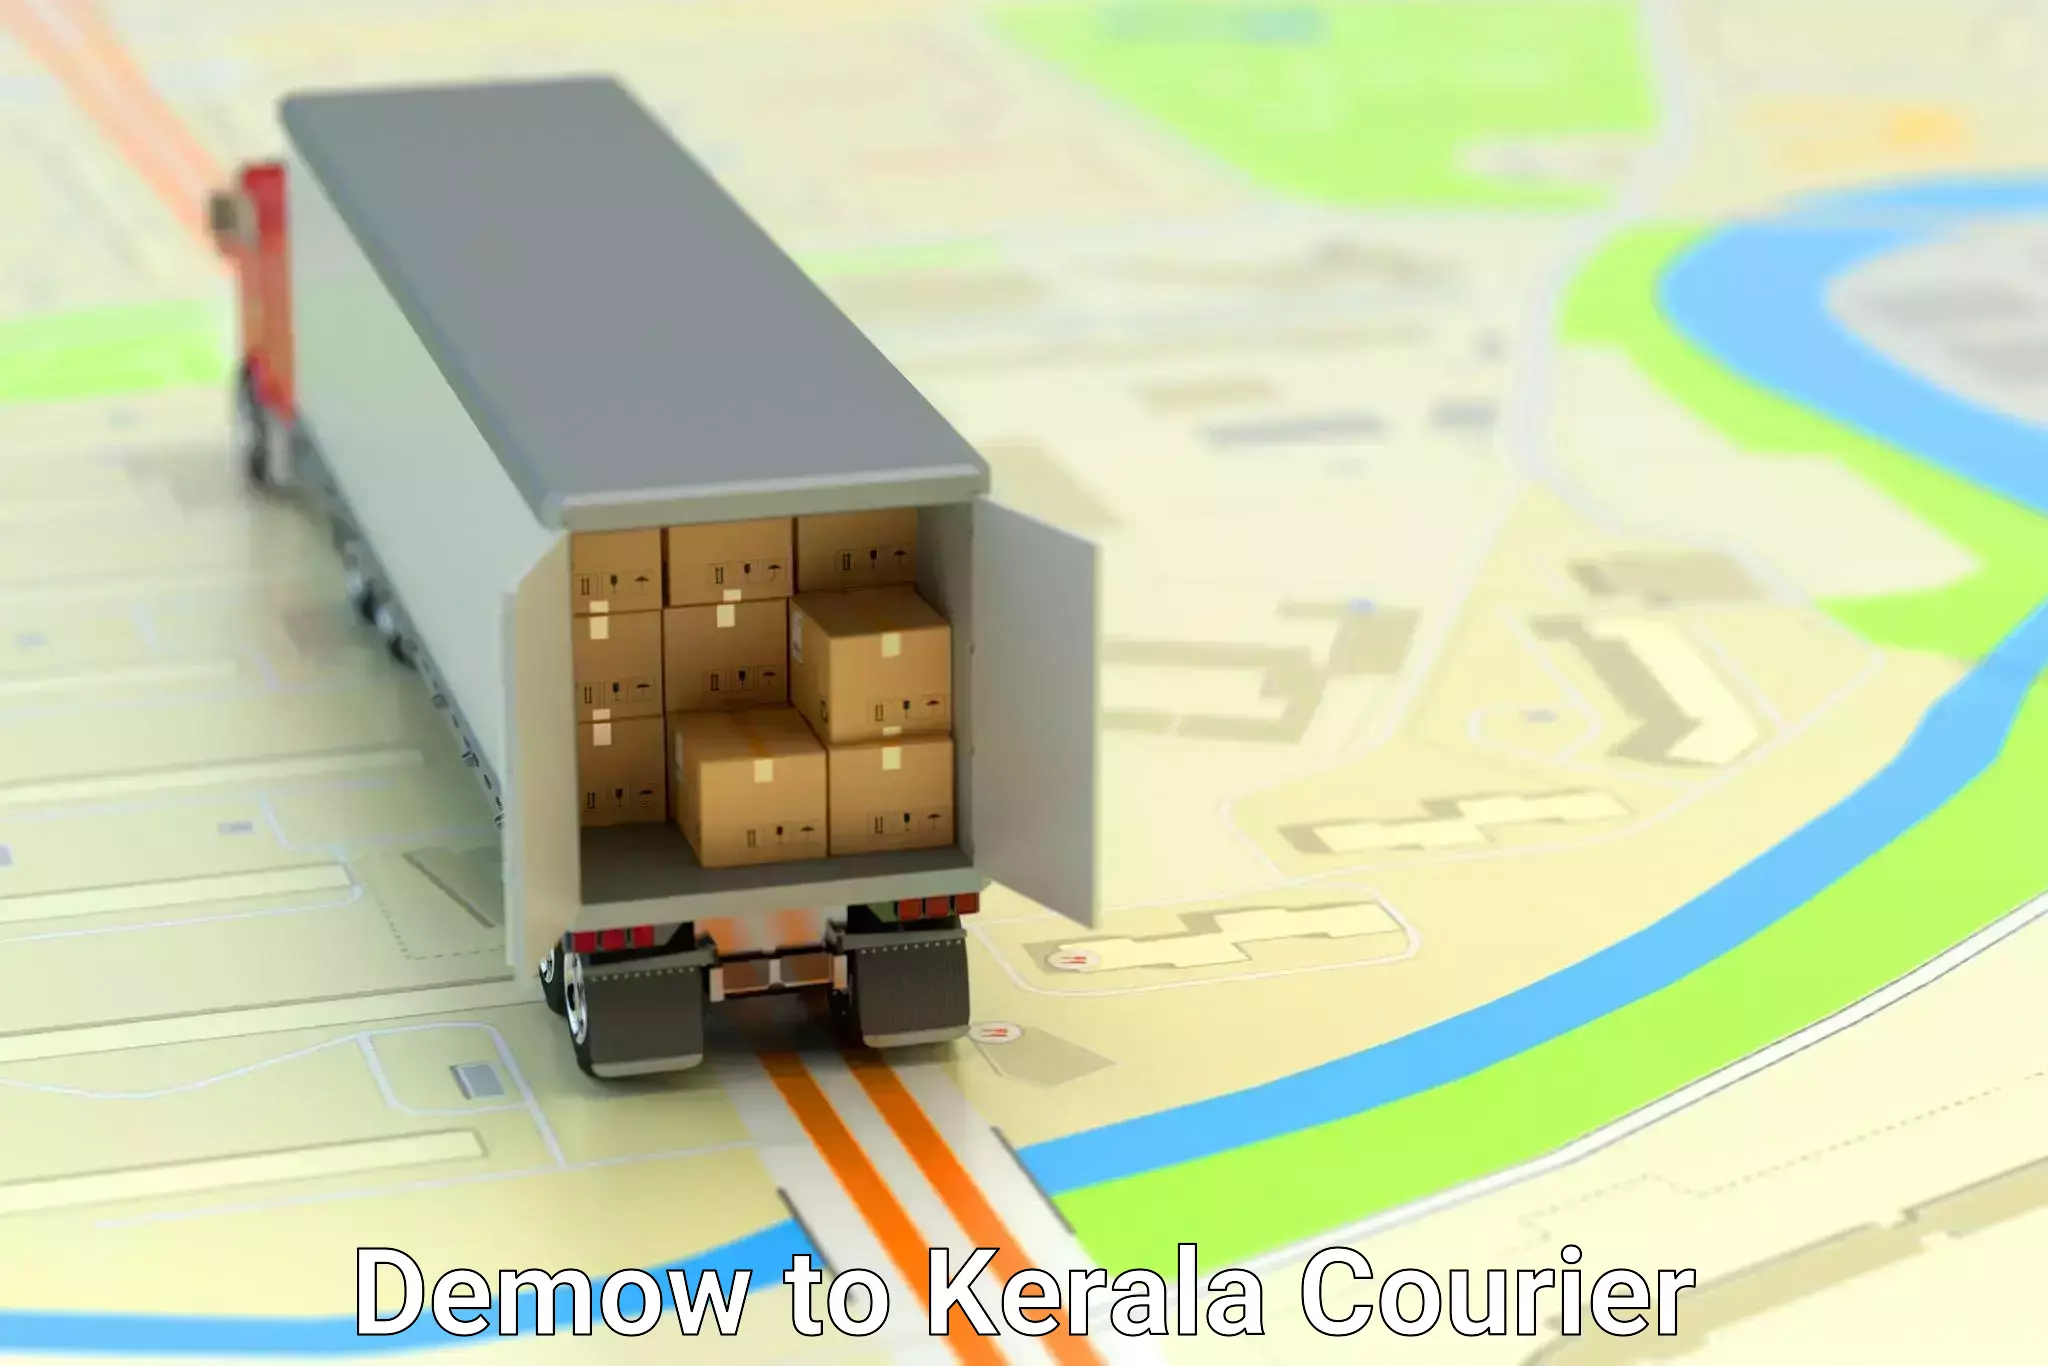 Nationwide courier service Demow to Kerala